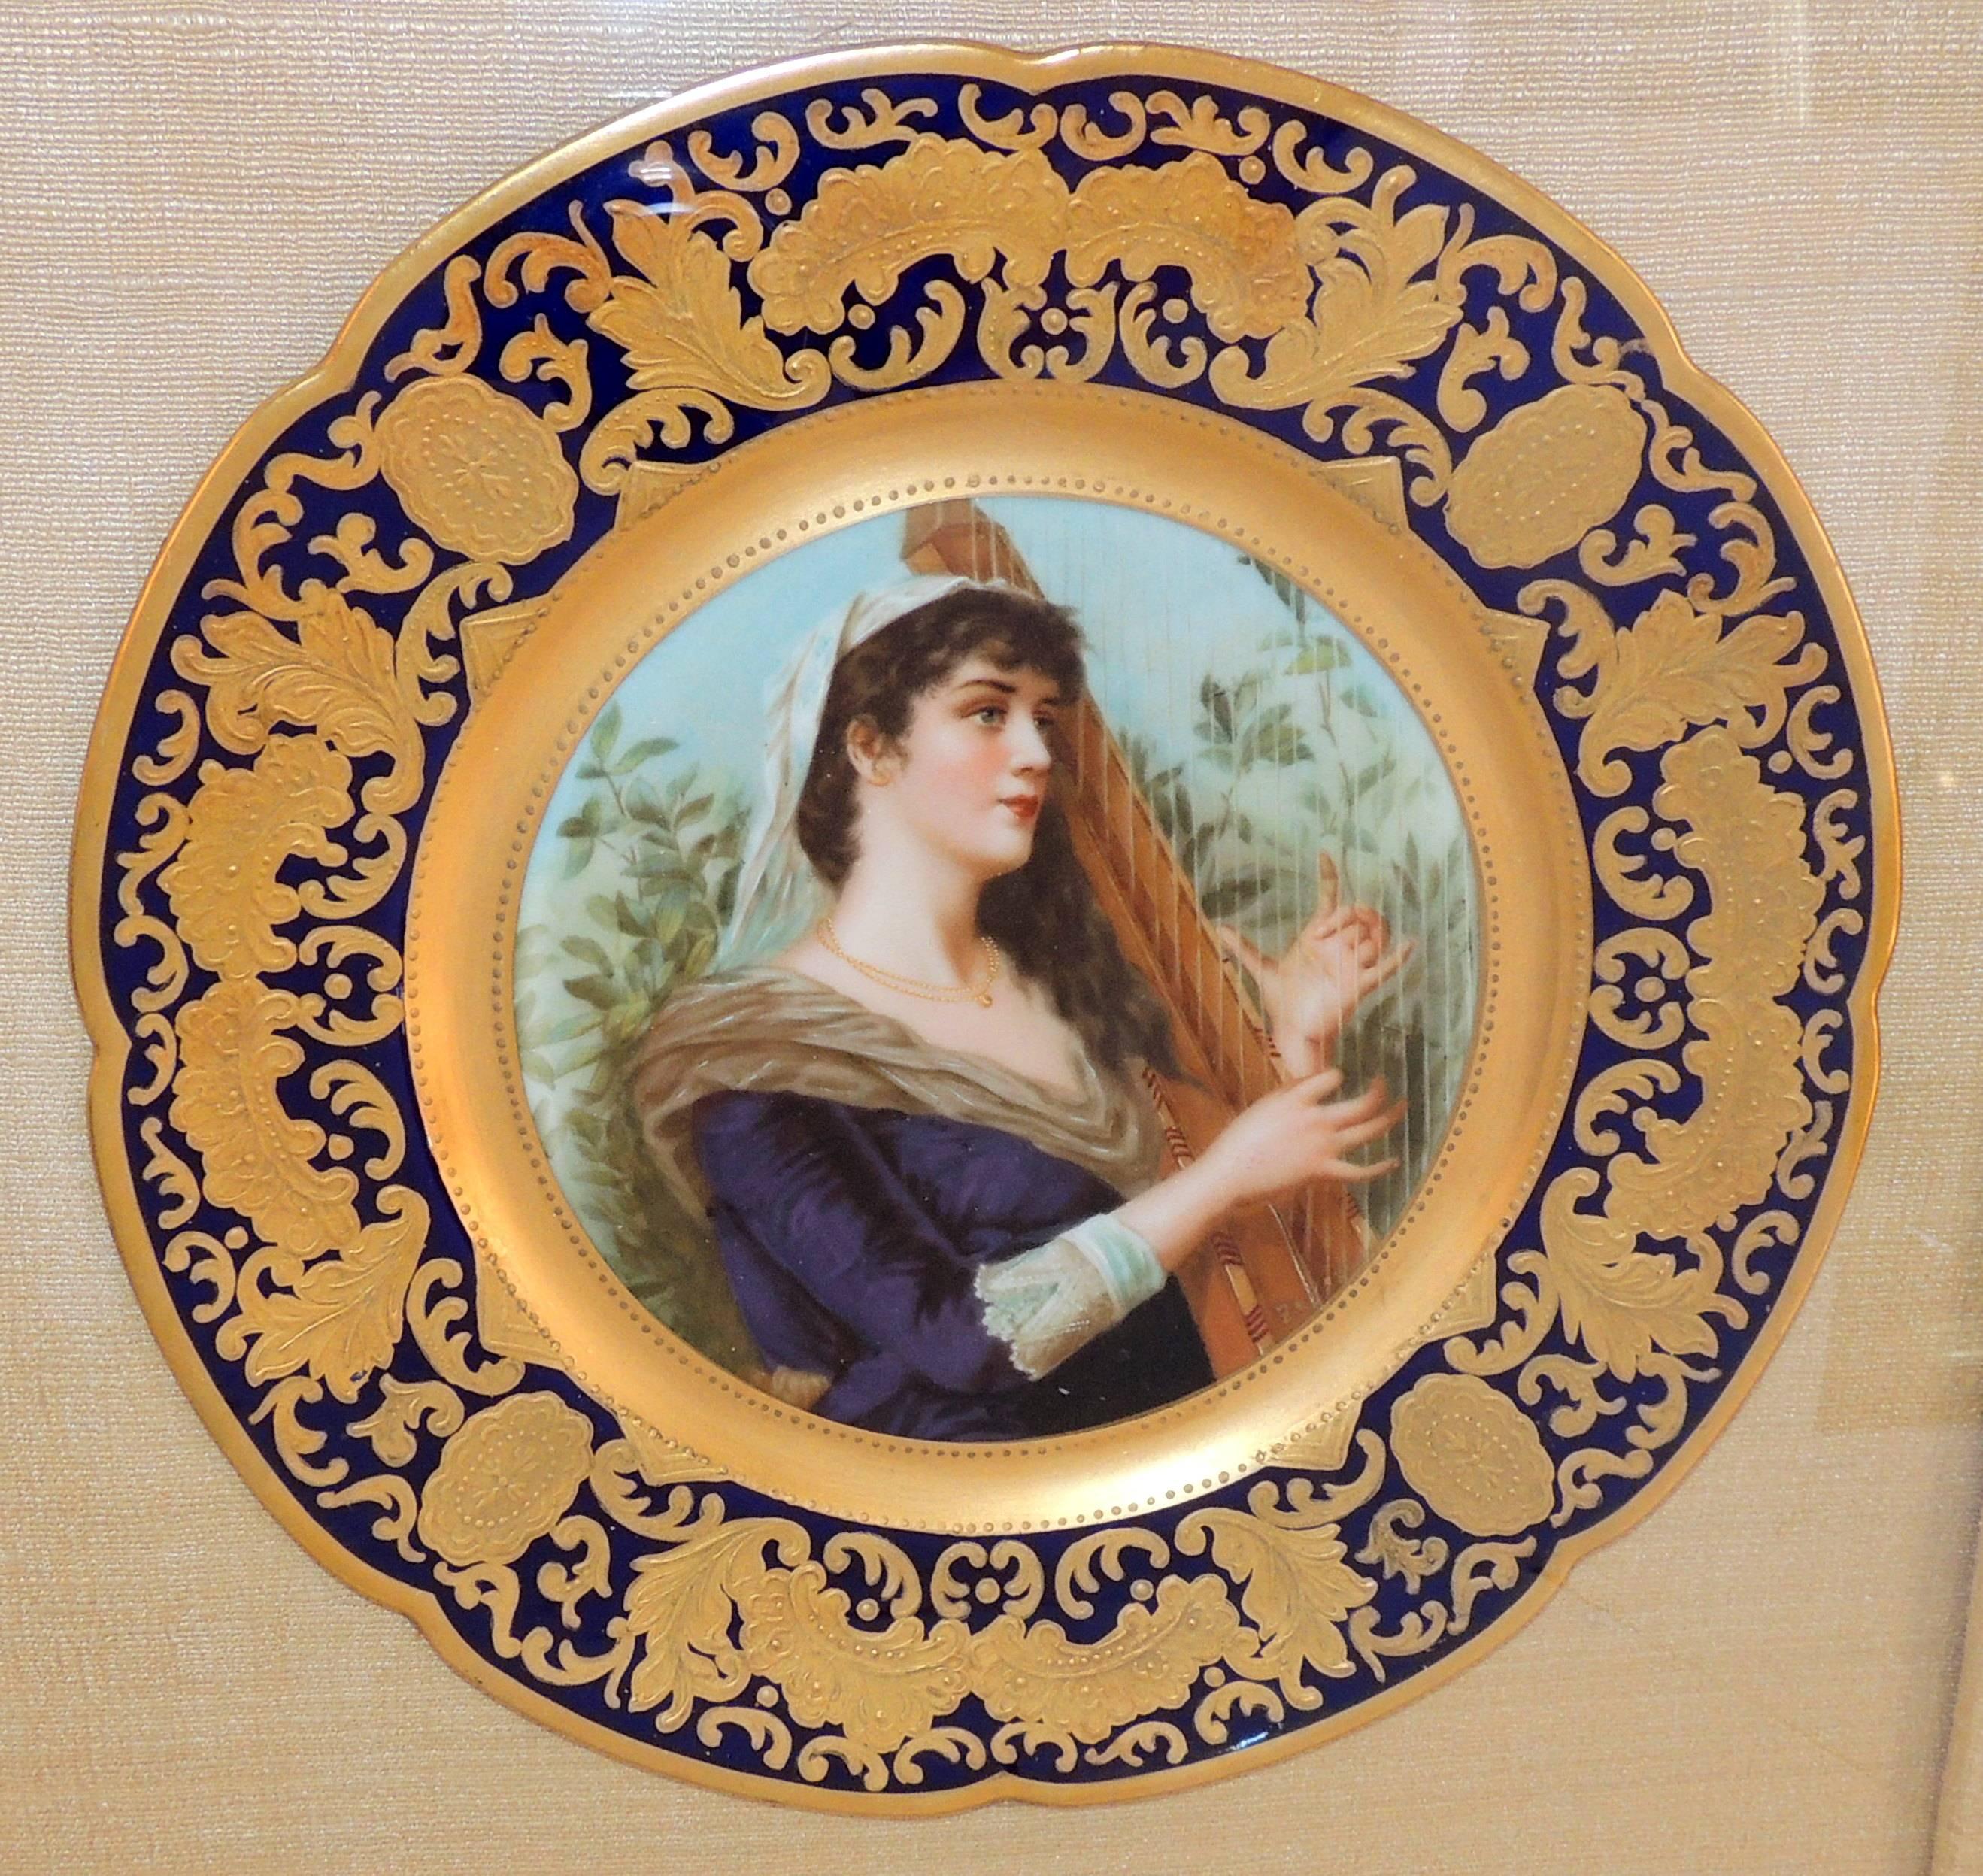 A fine French hand-painted portrait plate of a female harpist by Jules Etienne Rue De Paradis, France, 1898 beautifully framed in a gold gilt shadow box frame with beige backdrop. 
Measures:
Shadow box 18